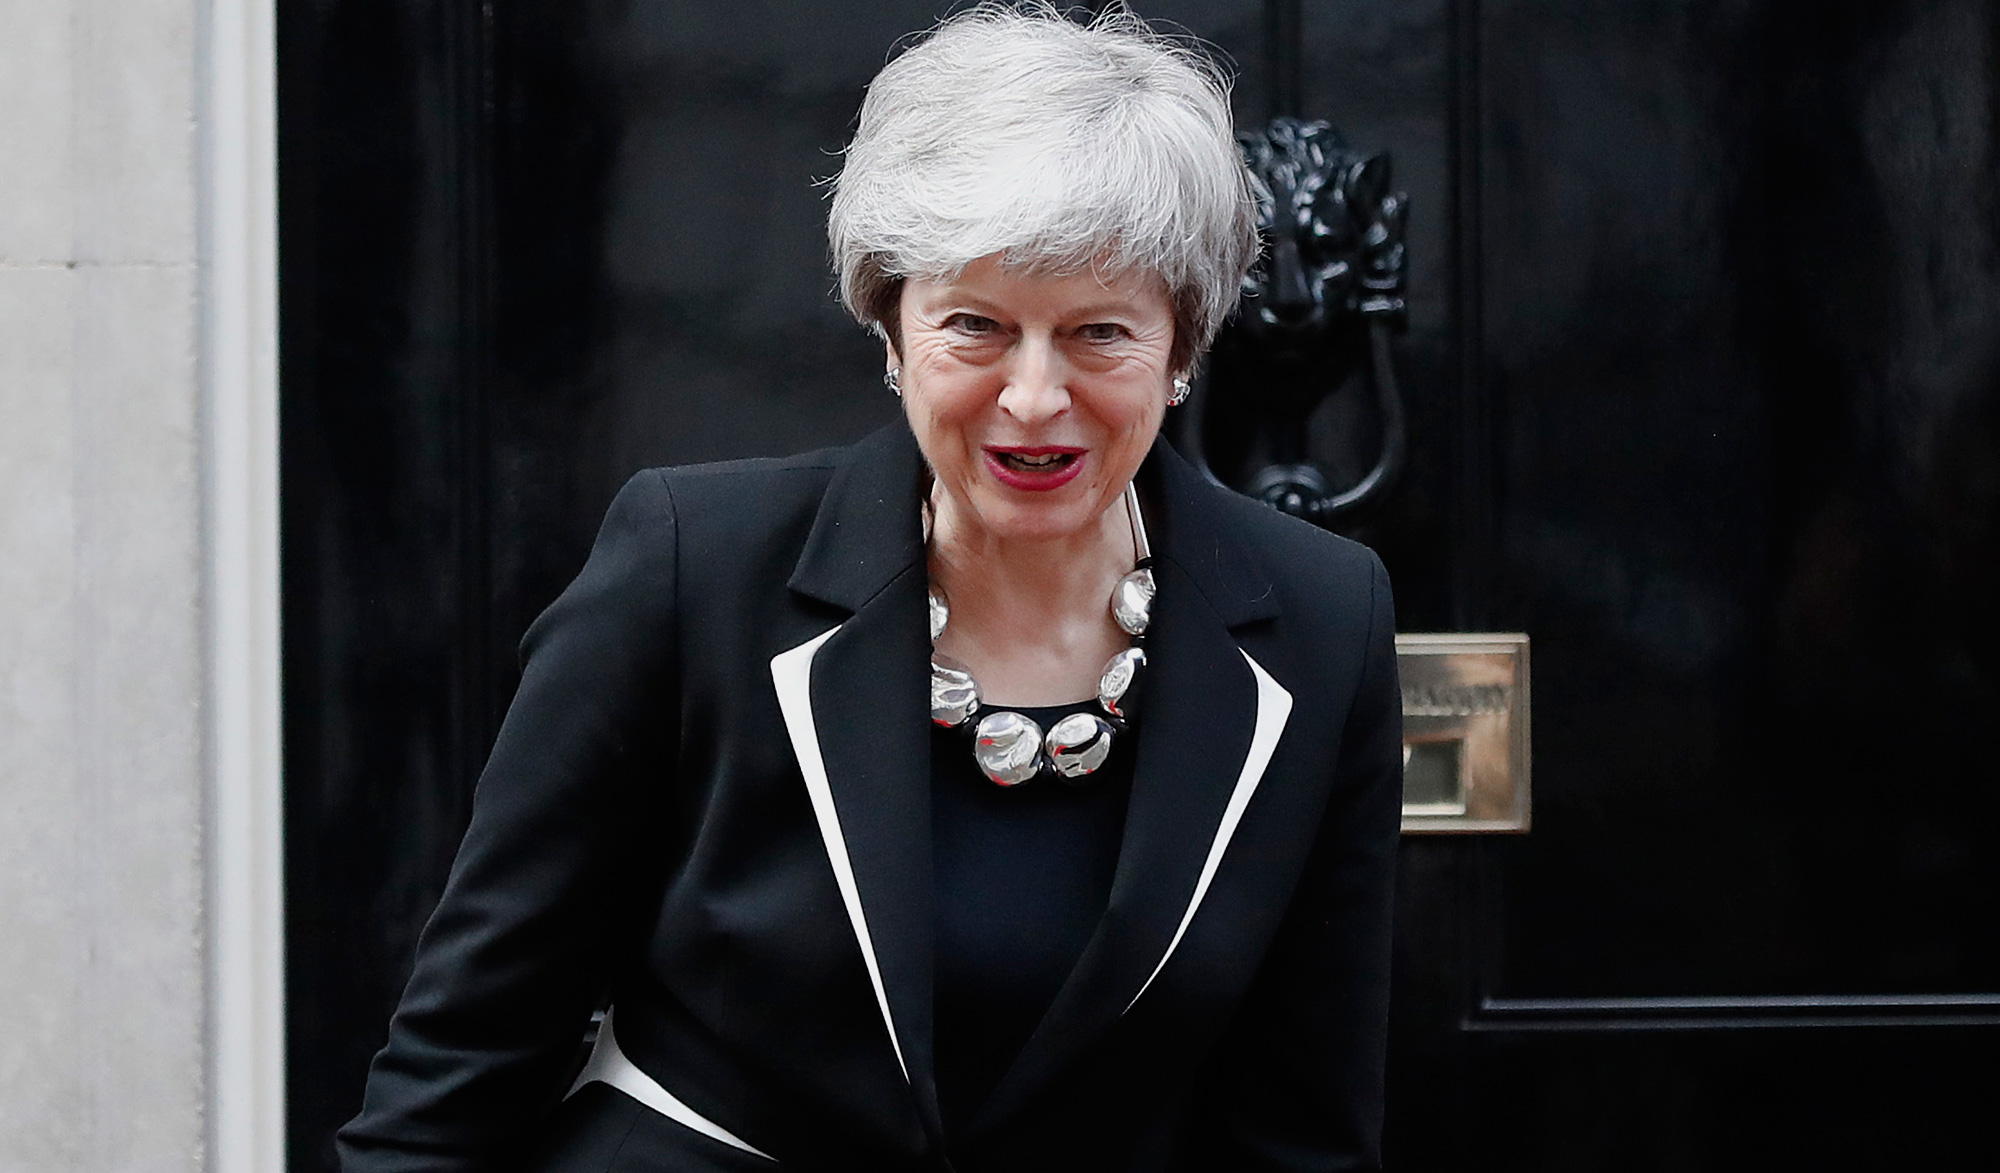 Theresa May’s Brexit deal could manage the support of only 202 MPs in the House of Commons.